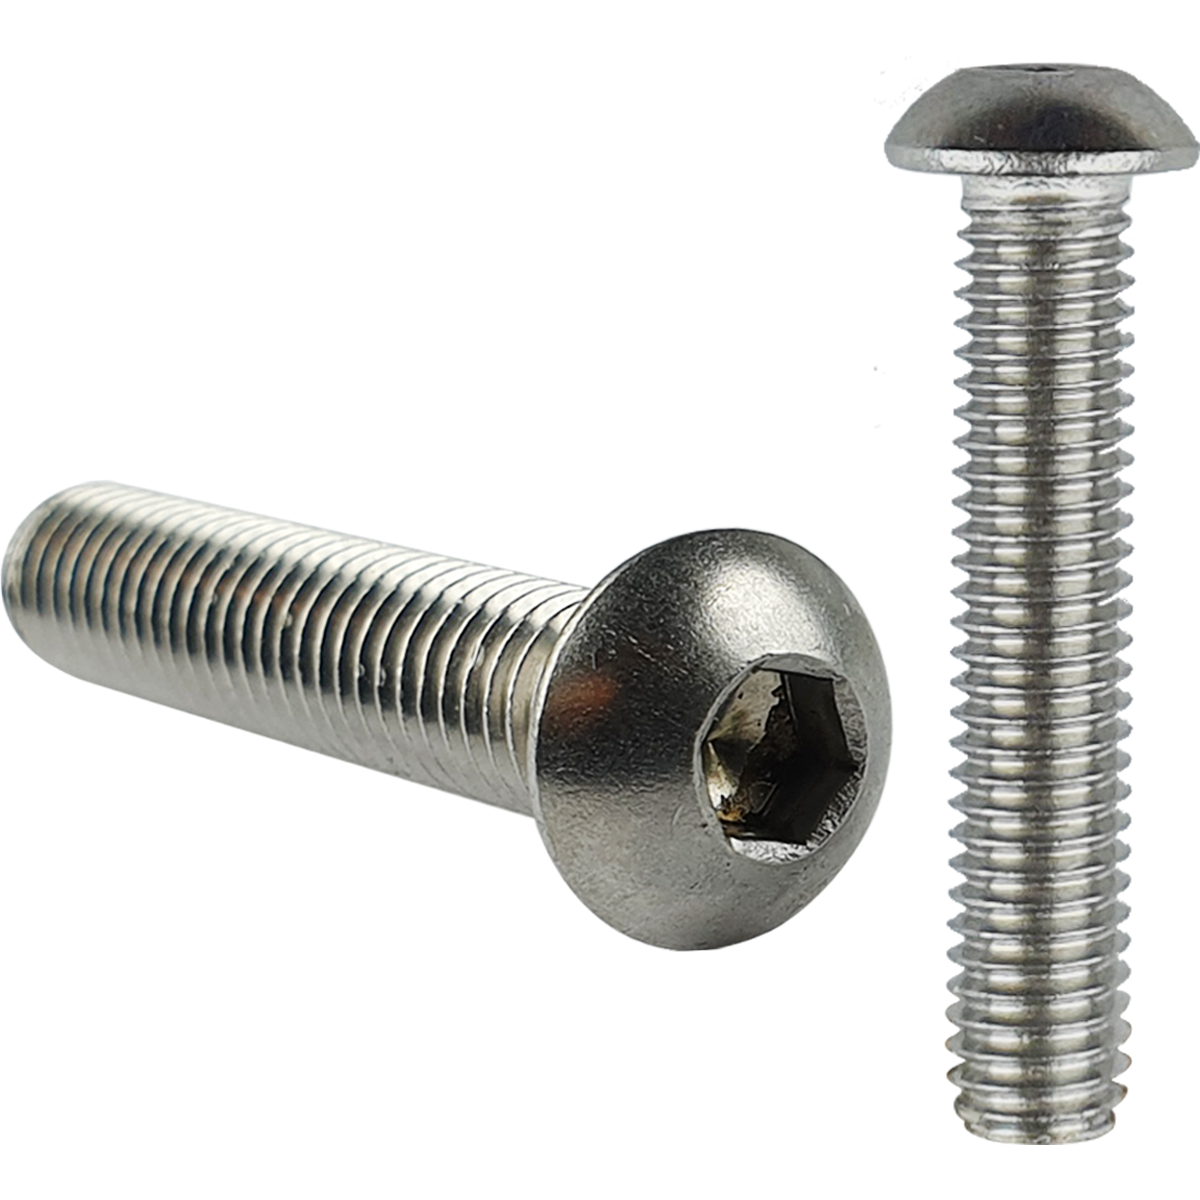 A2 stainless steel button head machine screws with an imperial unified fine thread (UNF). A machine screw with a button head for a snag free finish.